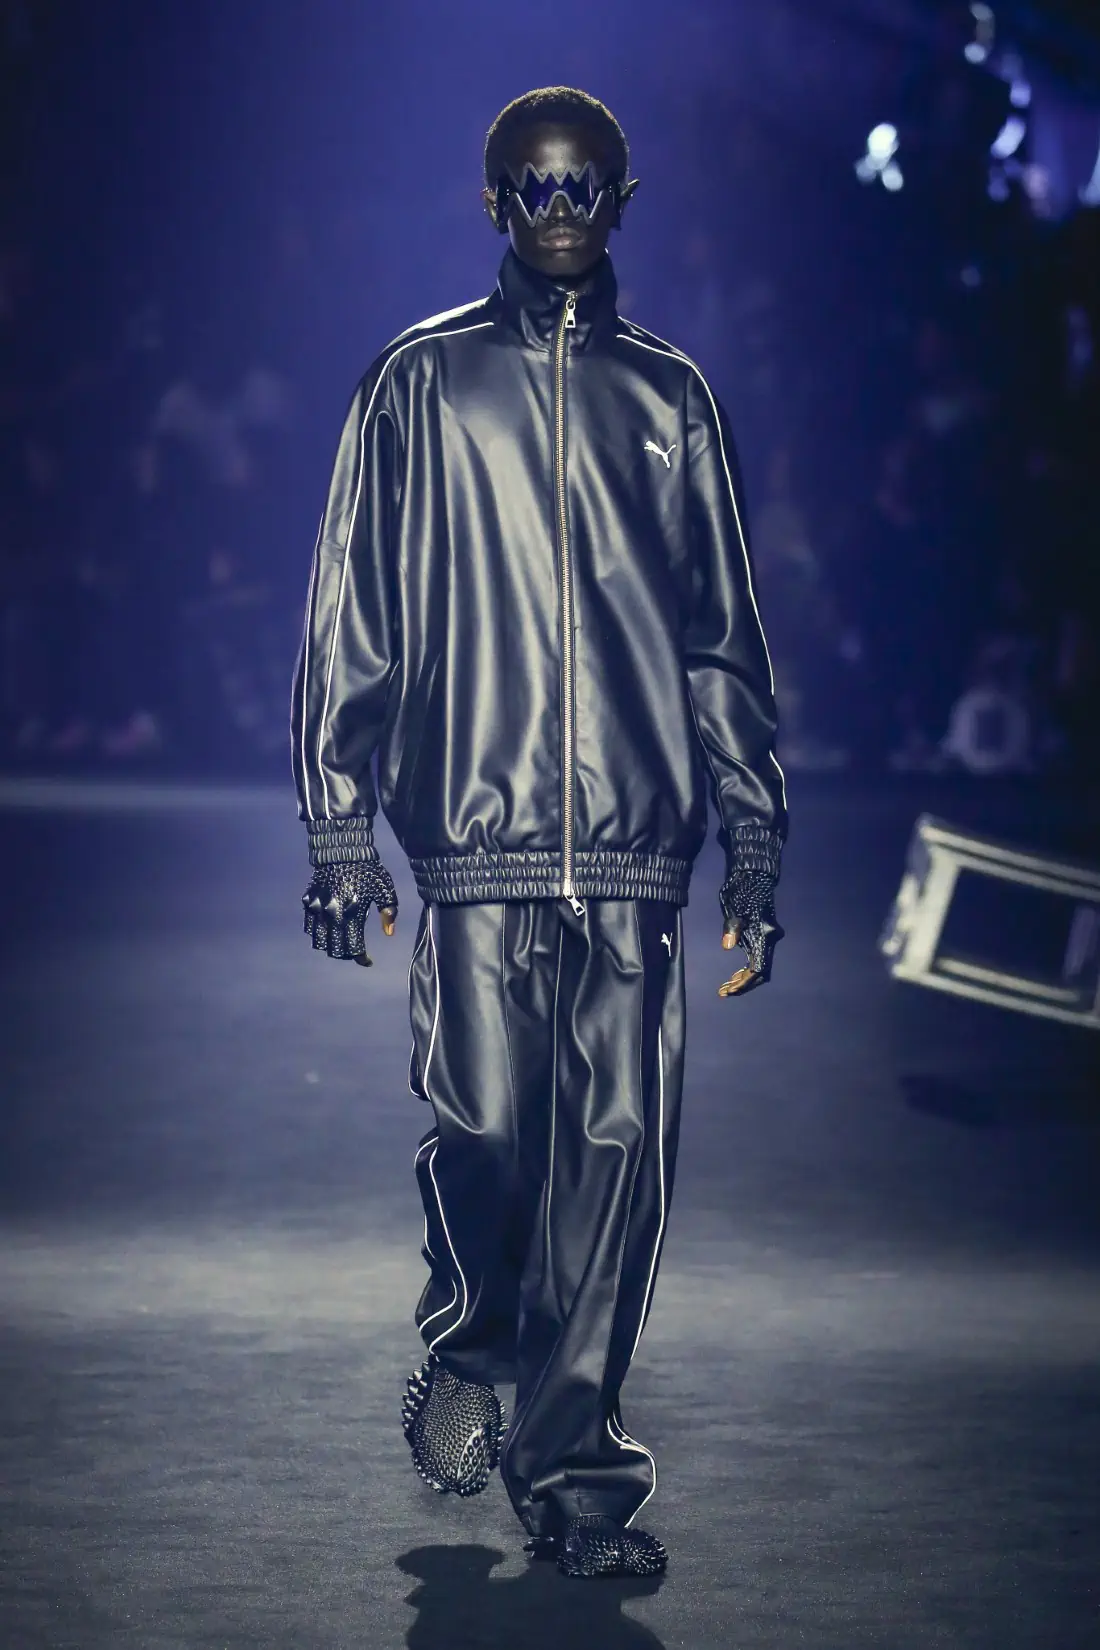 Puma's "Welcome To The Amazing Mostro Show" lights up New York Fashion Week